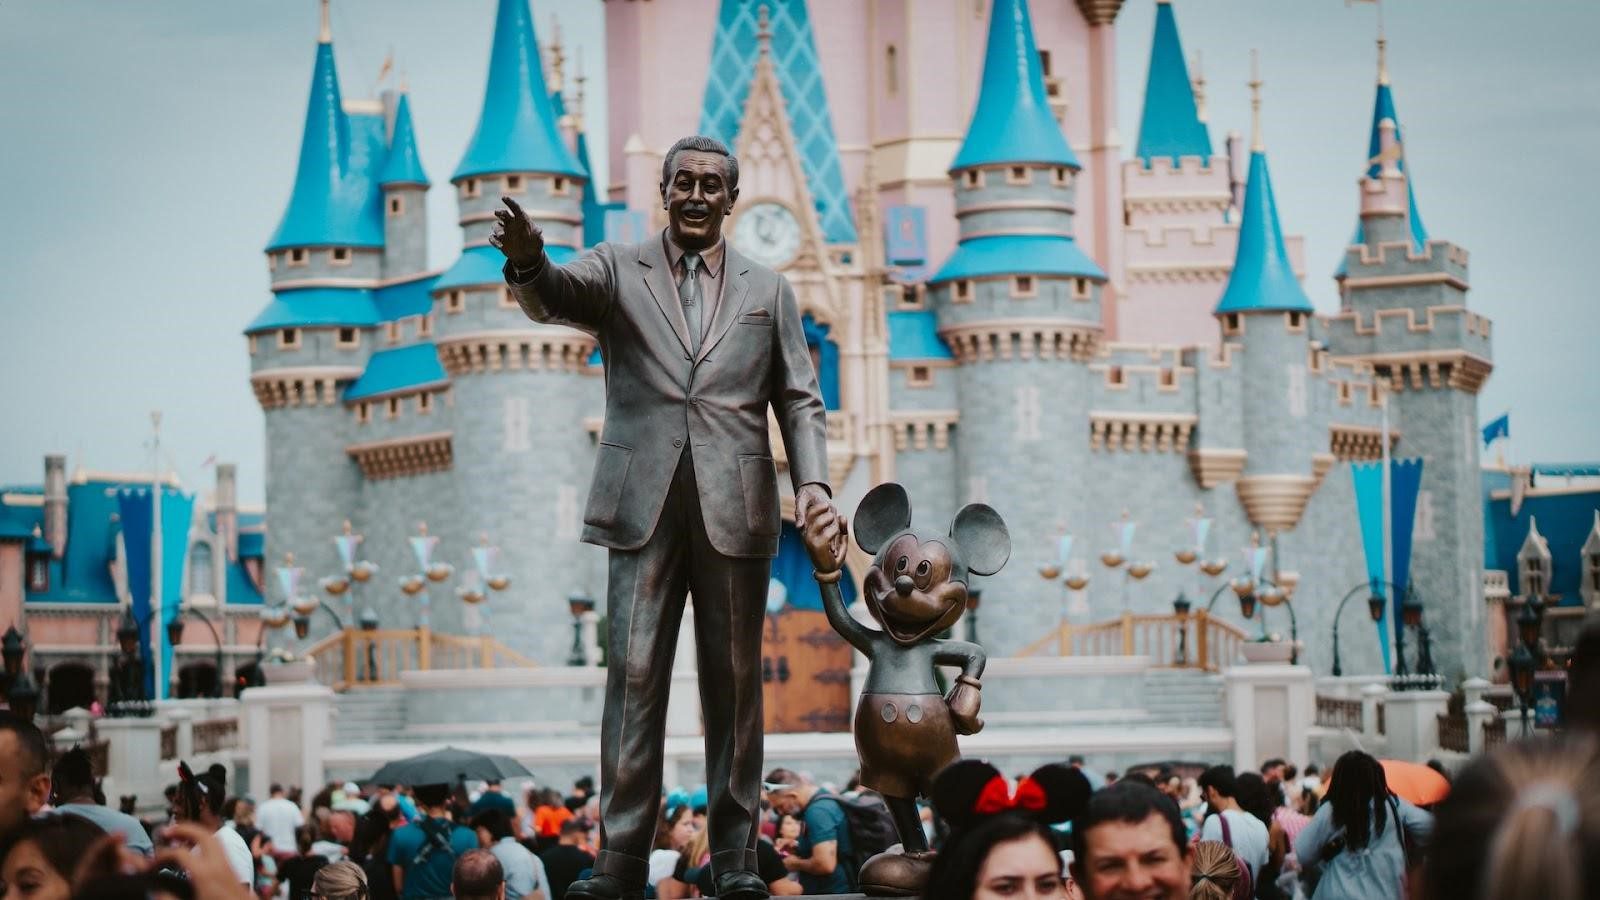 A photo of a statue at Disney World